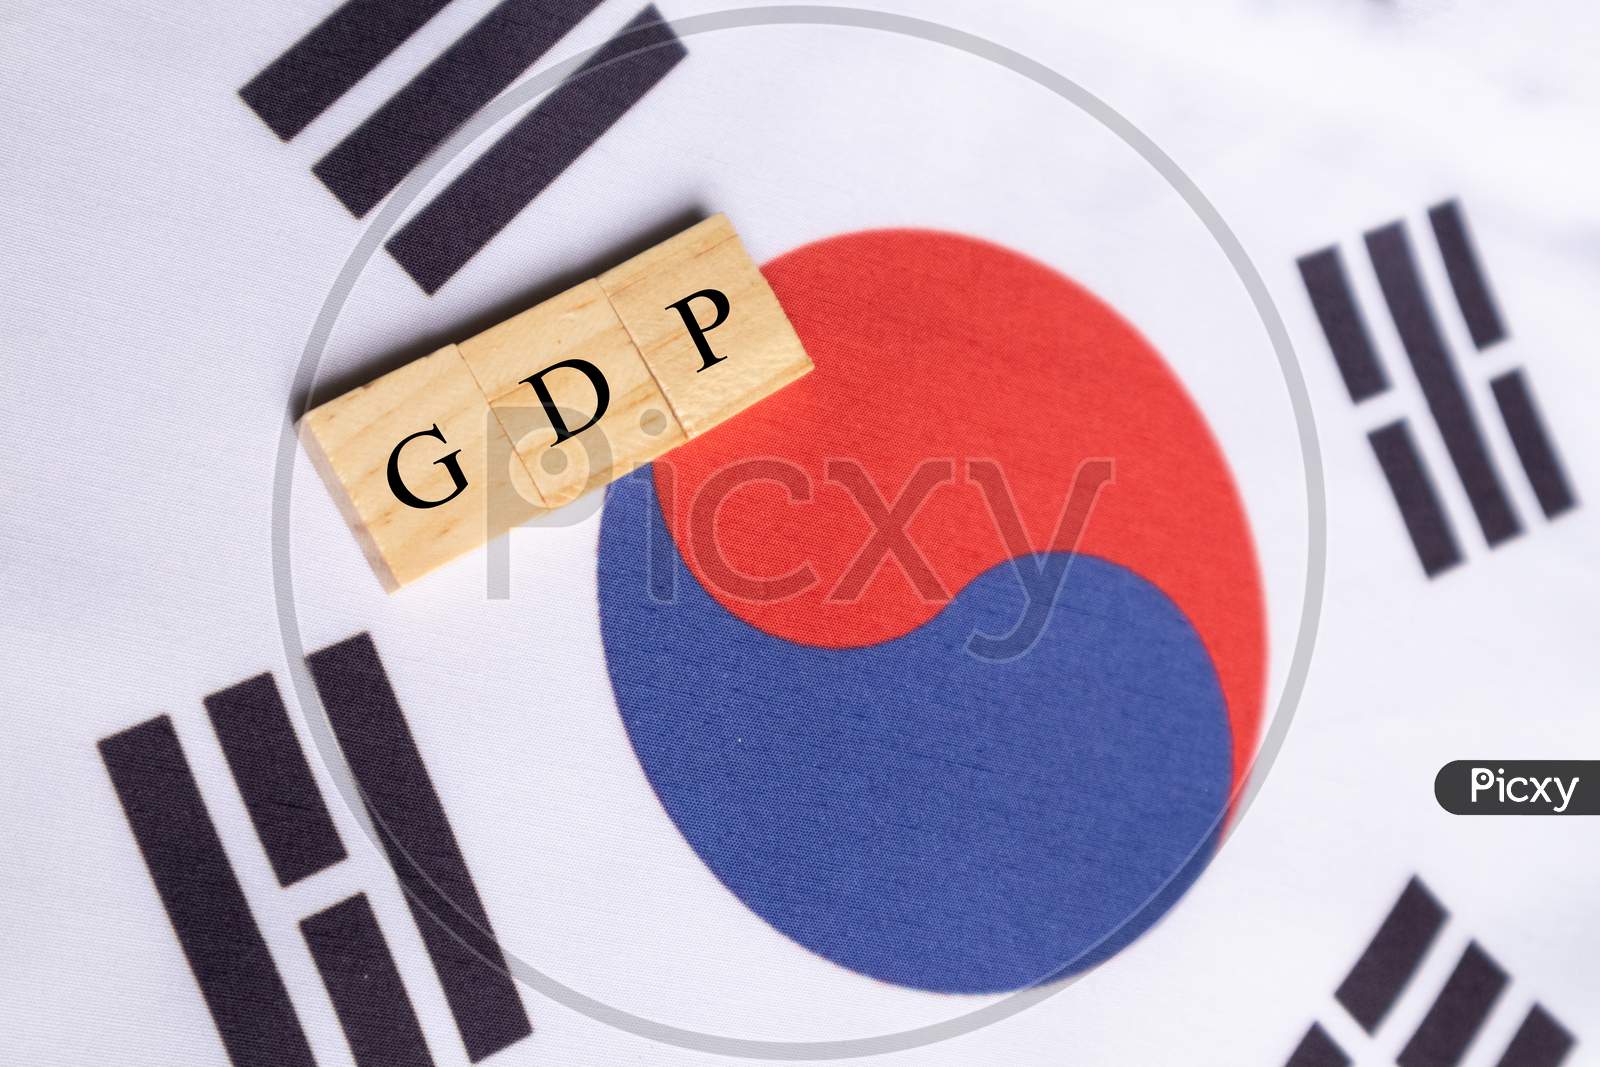 Gross Domestic Product Or Gdp Of South Korea In Wooden Block Letters On South Korean Flag.